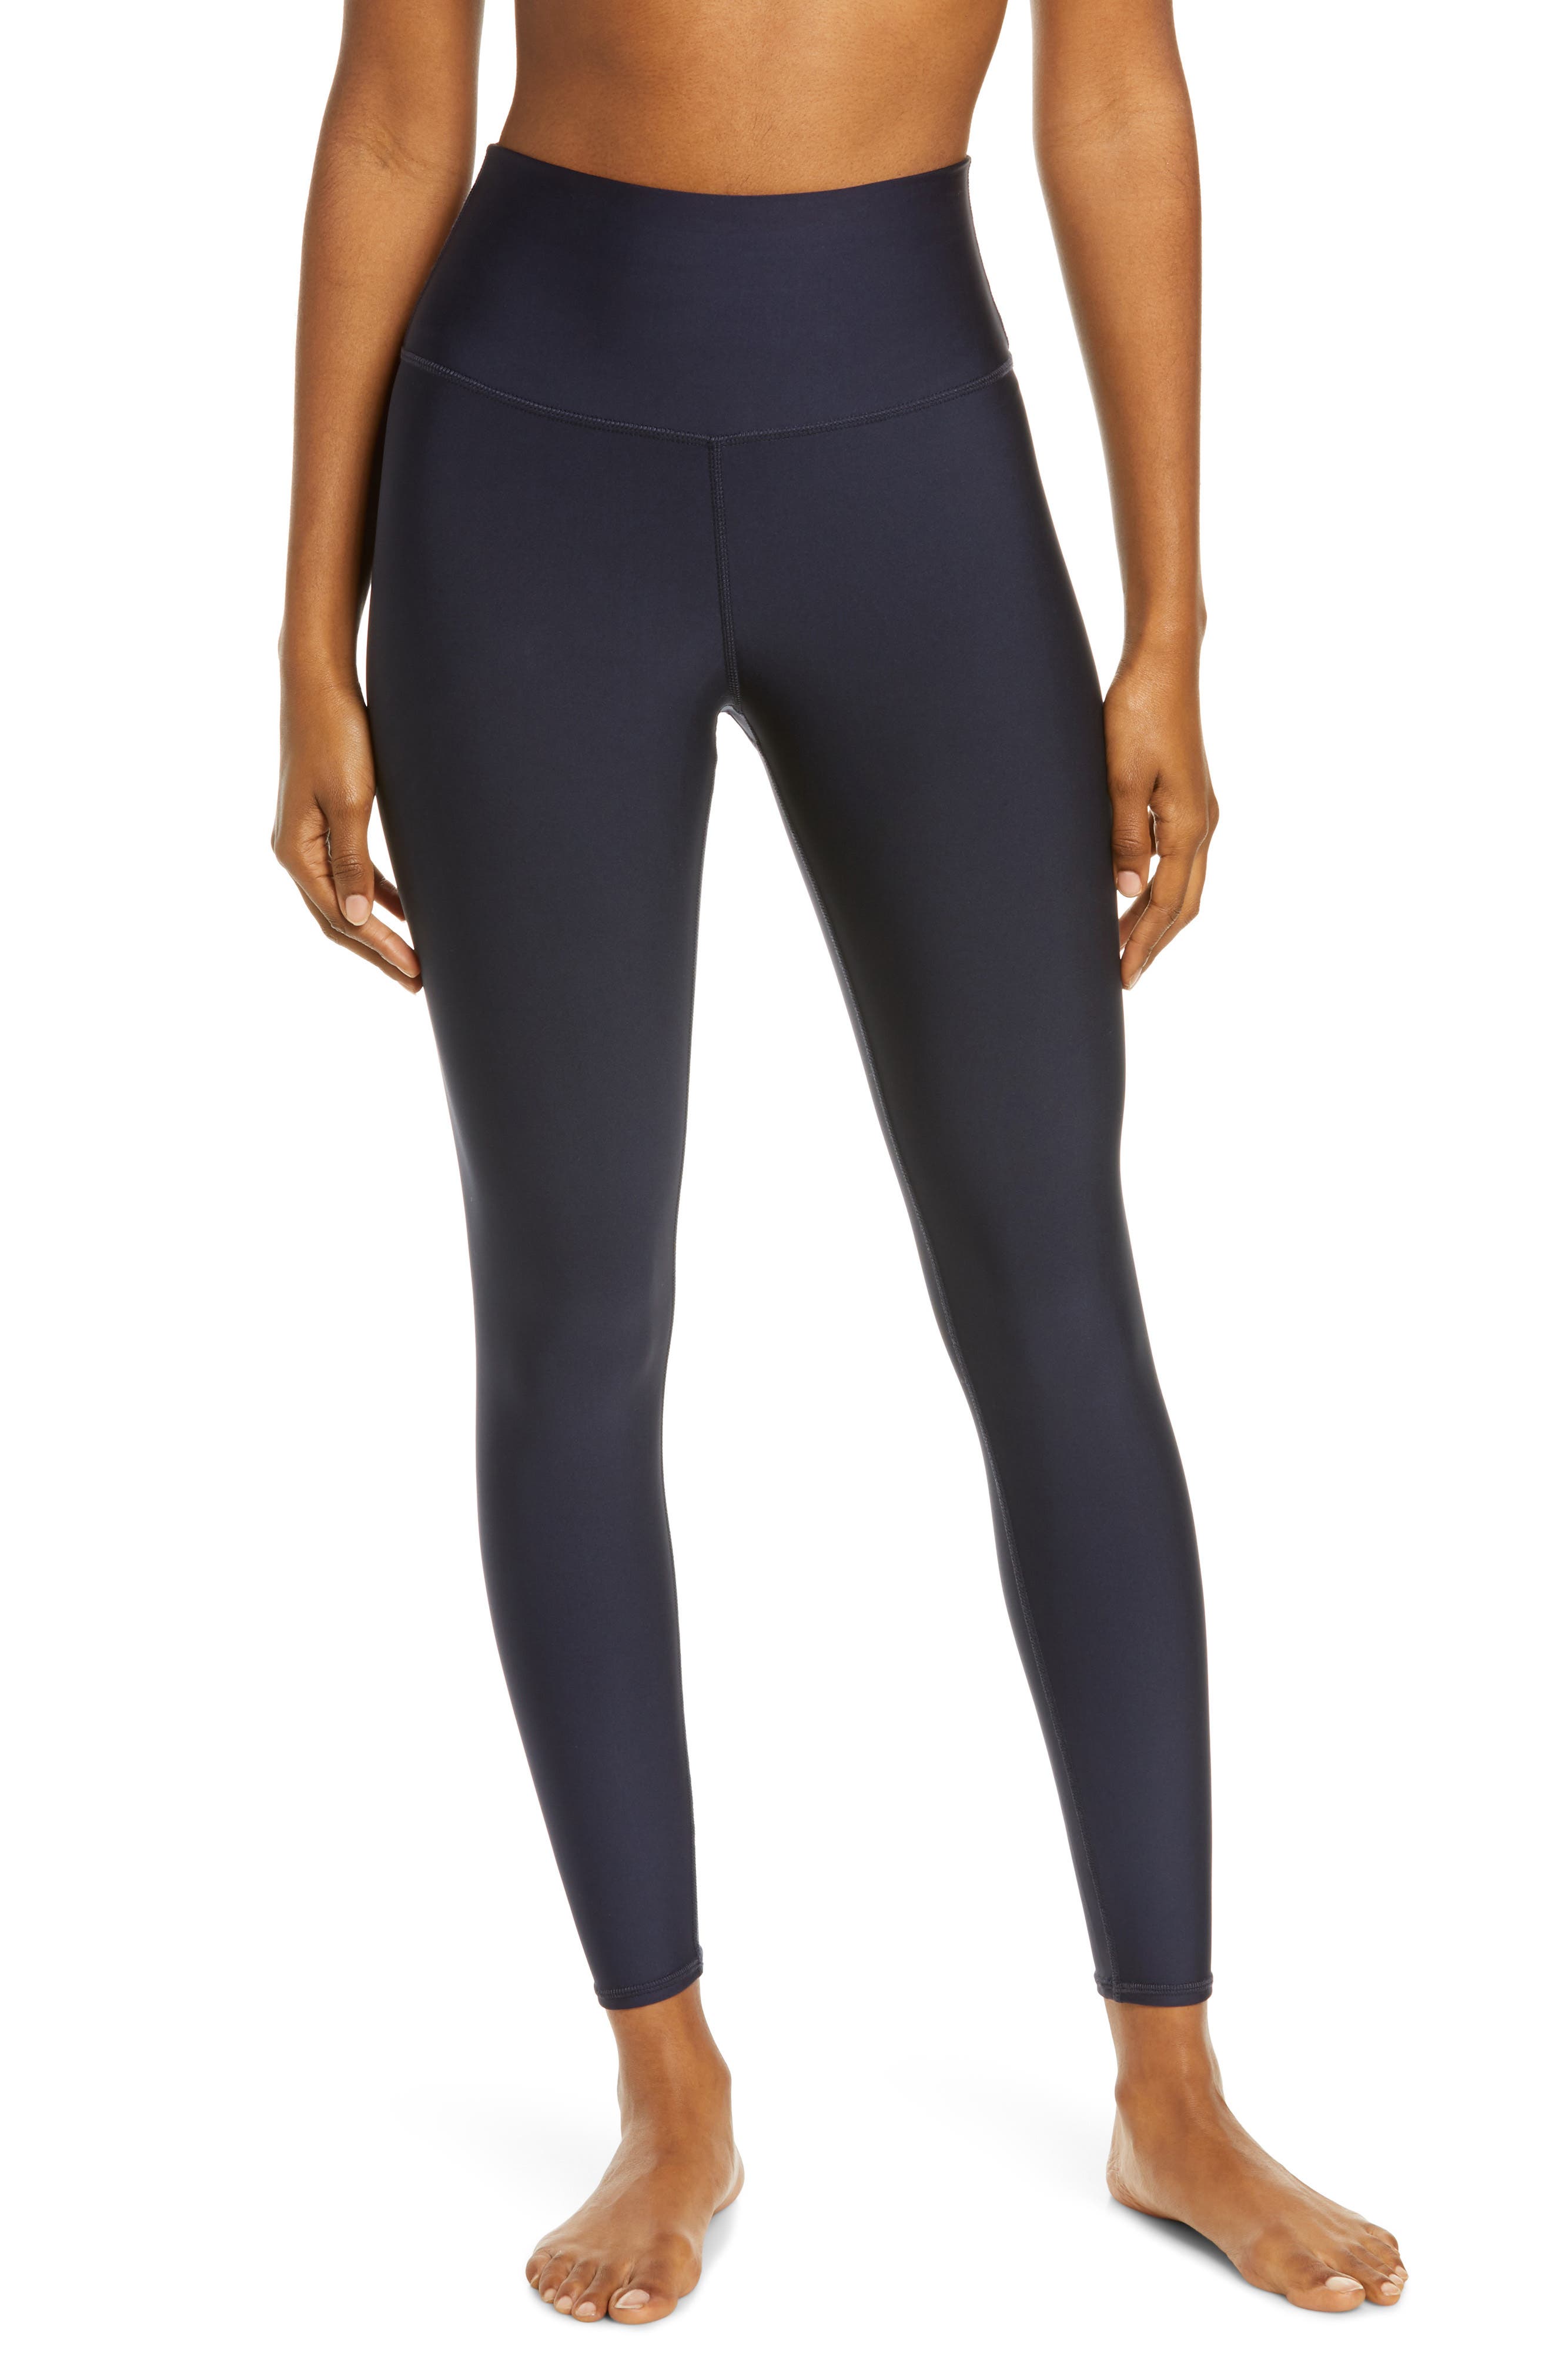 alo High Waist Airlift Legging in Black. - size L (also in M, S